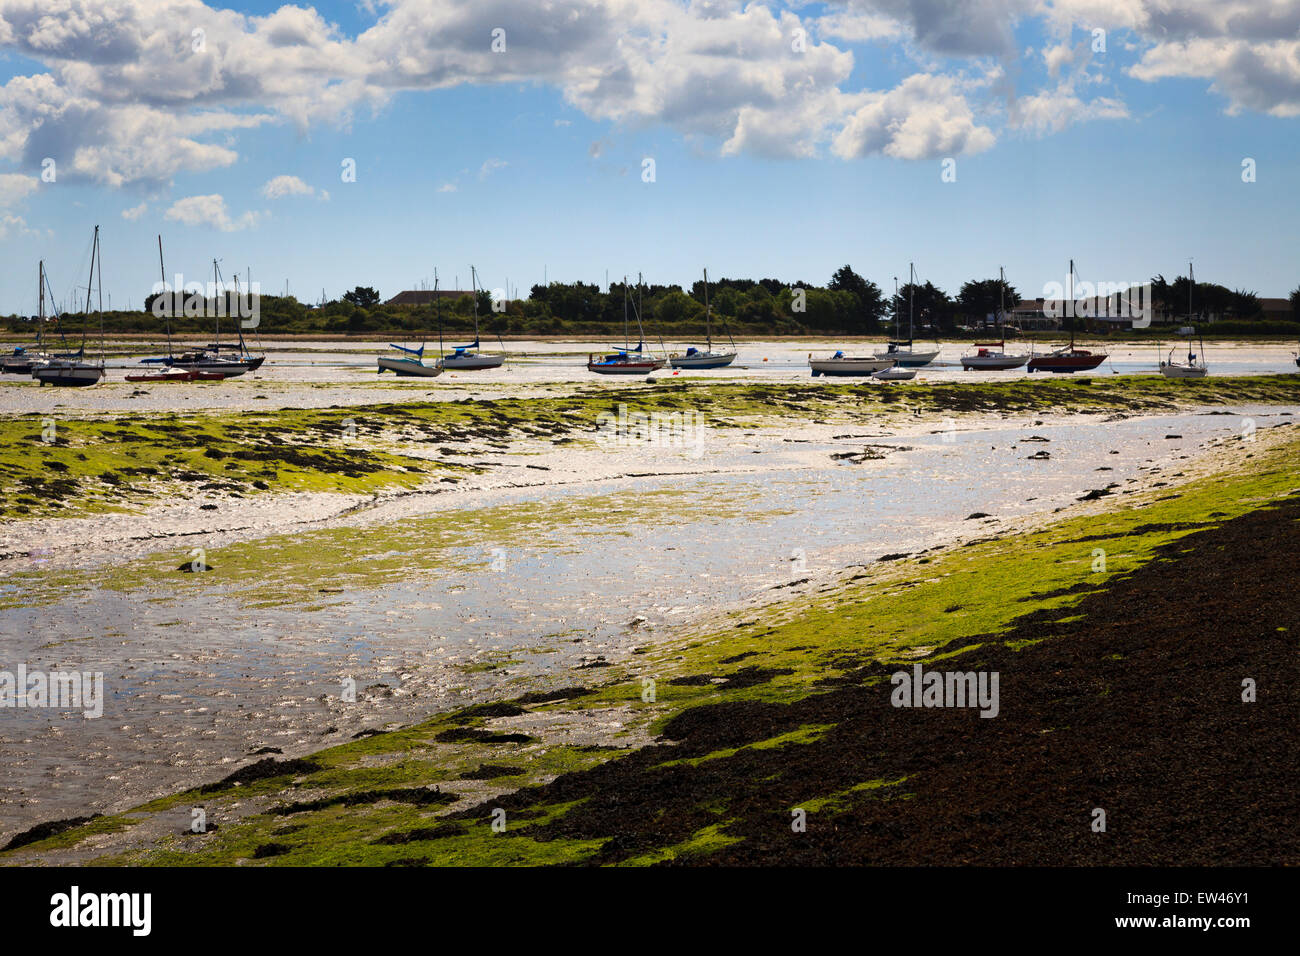 Low tide mud flats with yachts Stock Photo